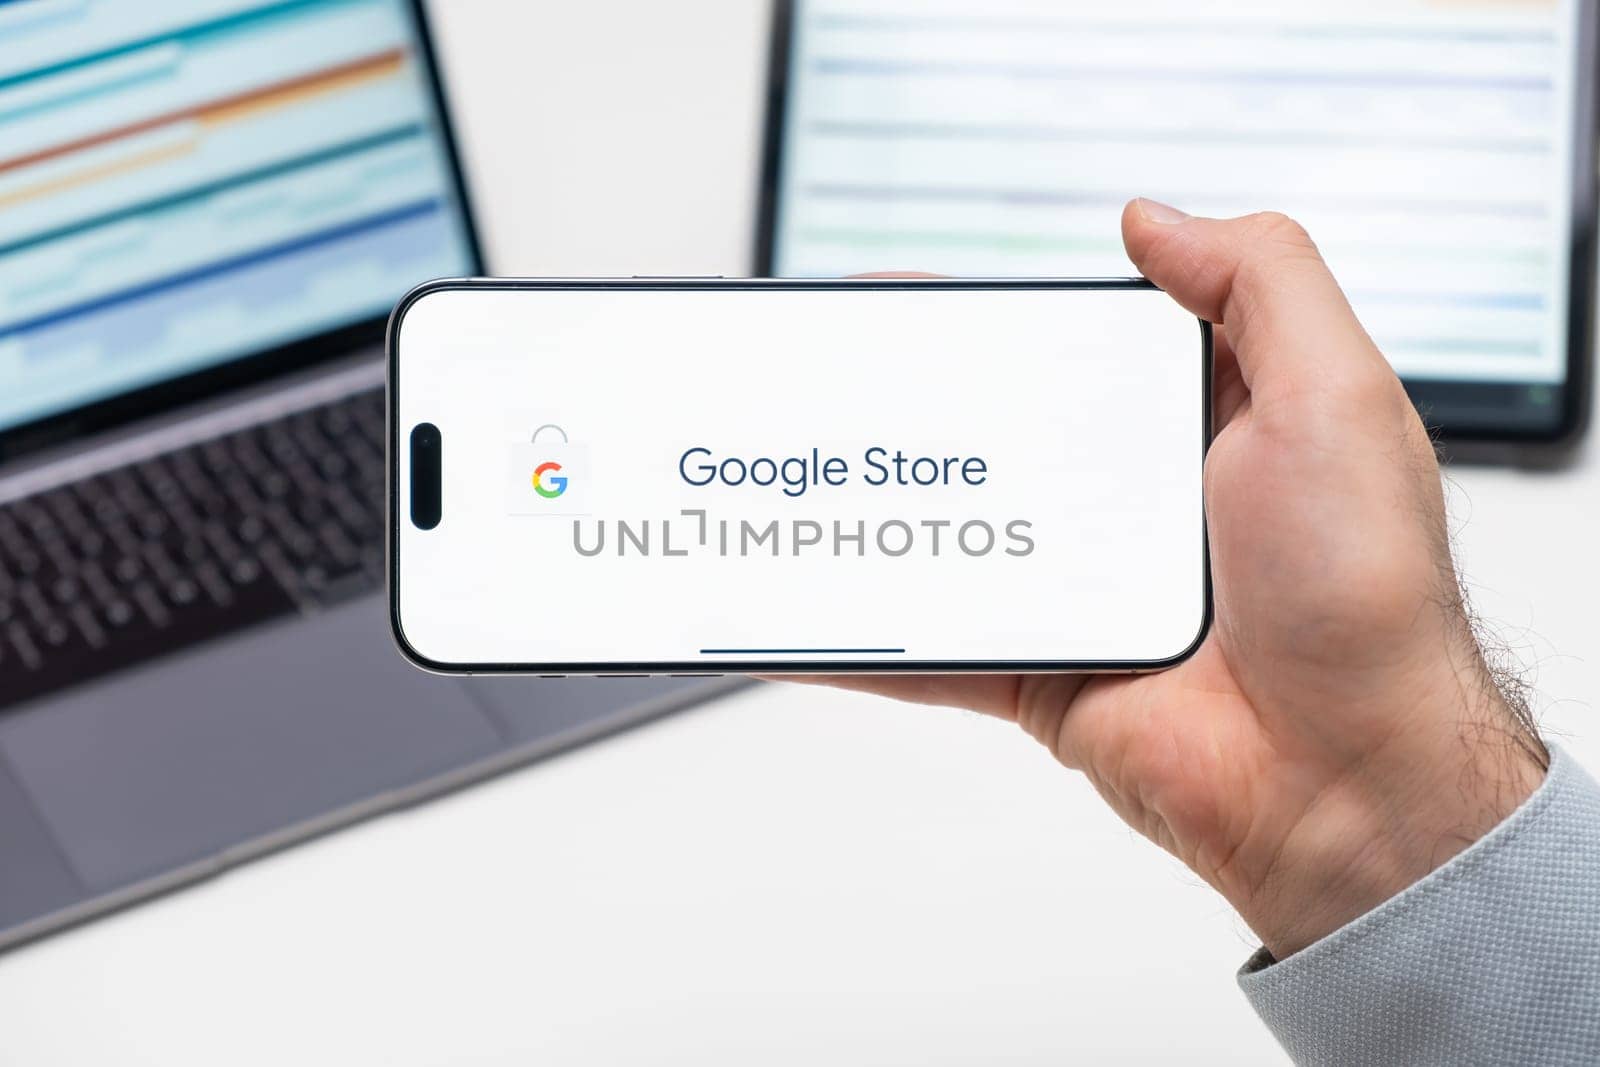 Google store logo of app on the screen of mobile phone held by man in front of the laptop and tablet, December 2023, Prague, Czech Republic